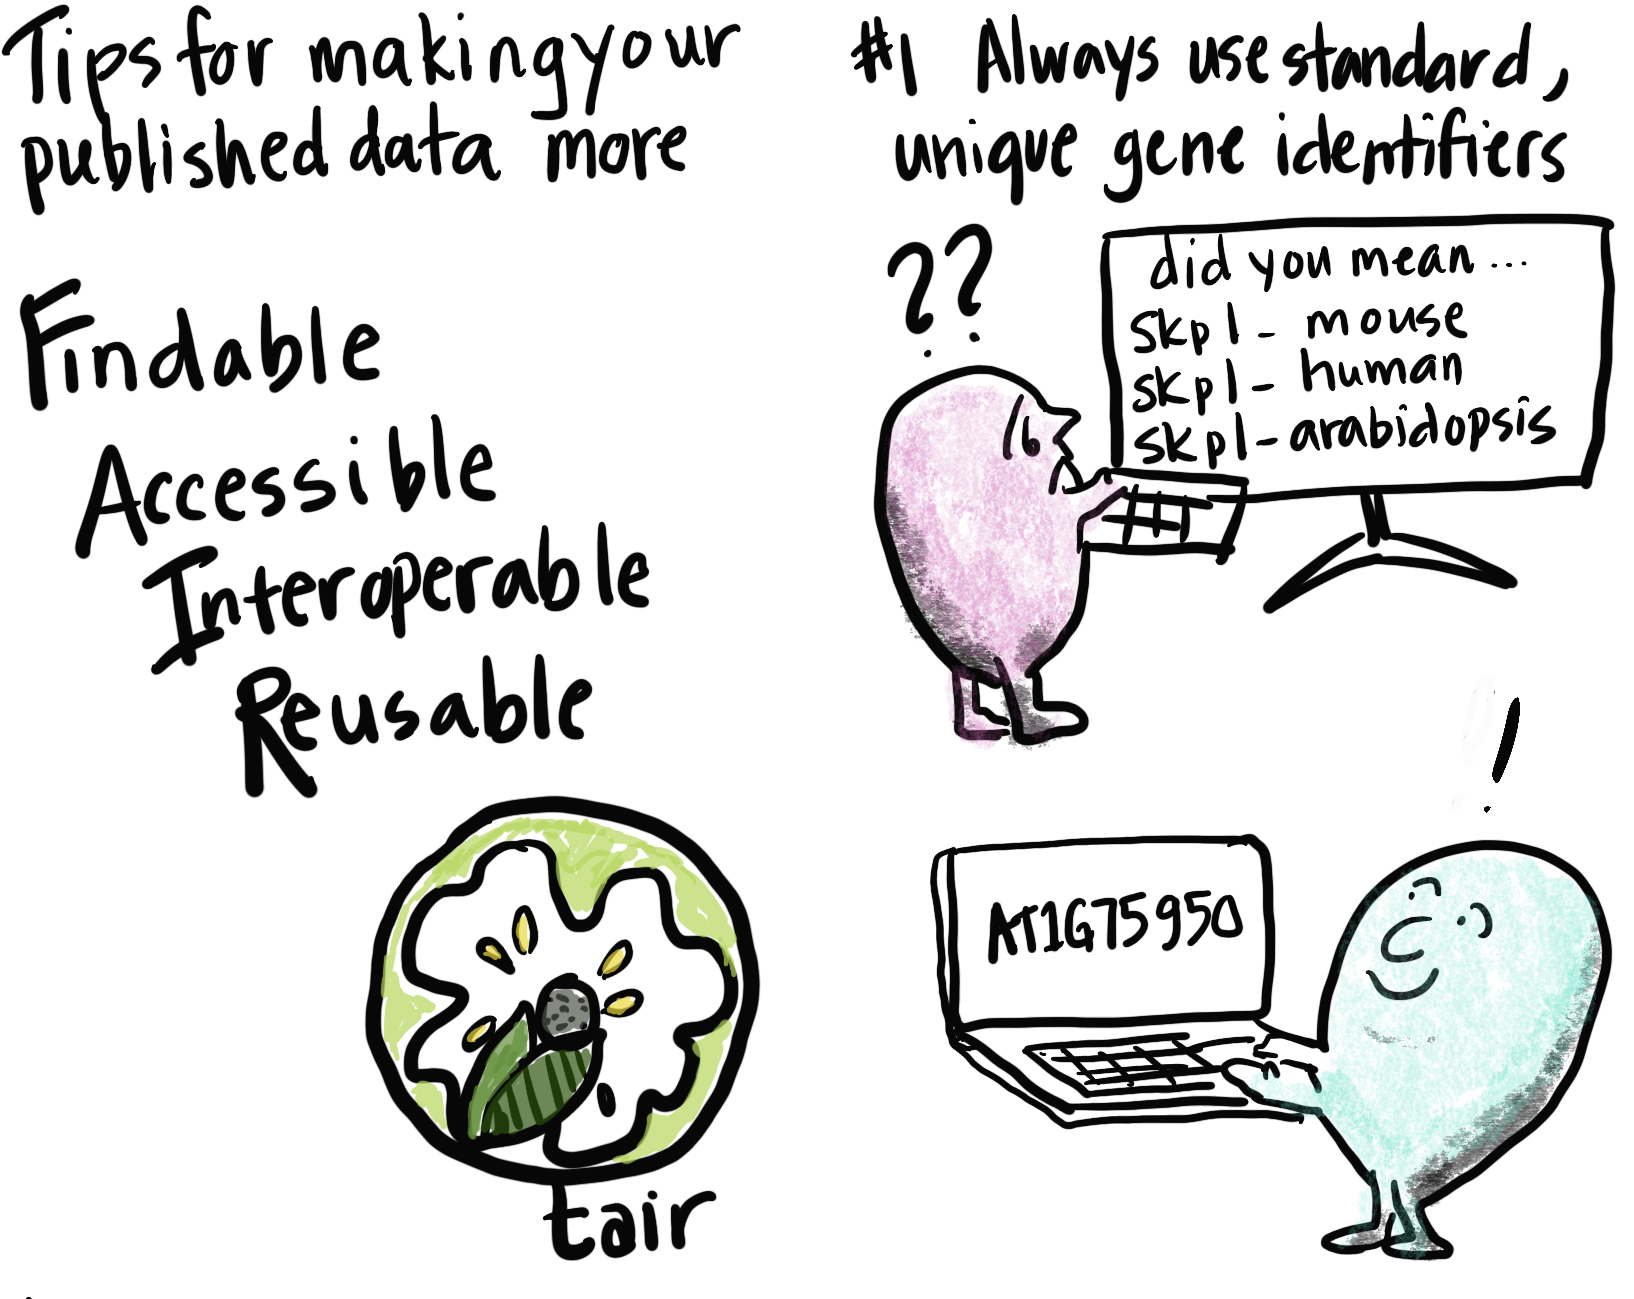 First page of zine is the title, Findable Accessible Interoperable Reusable, with a handdrawn logo of tair.  Second Page is titled with #1 Always use standard unique identifiers, with images of one pink cute monster confused in front of a computer with error message and another happy monster looking at computer with standardized identifier text. 